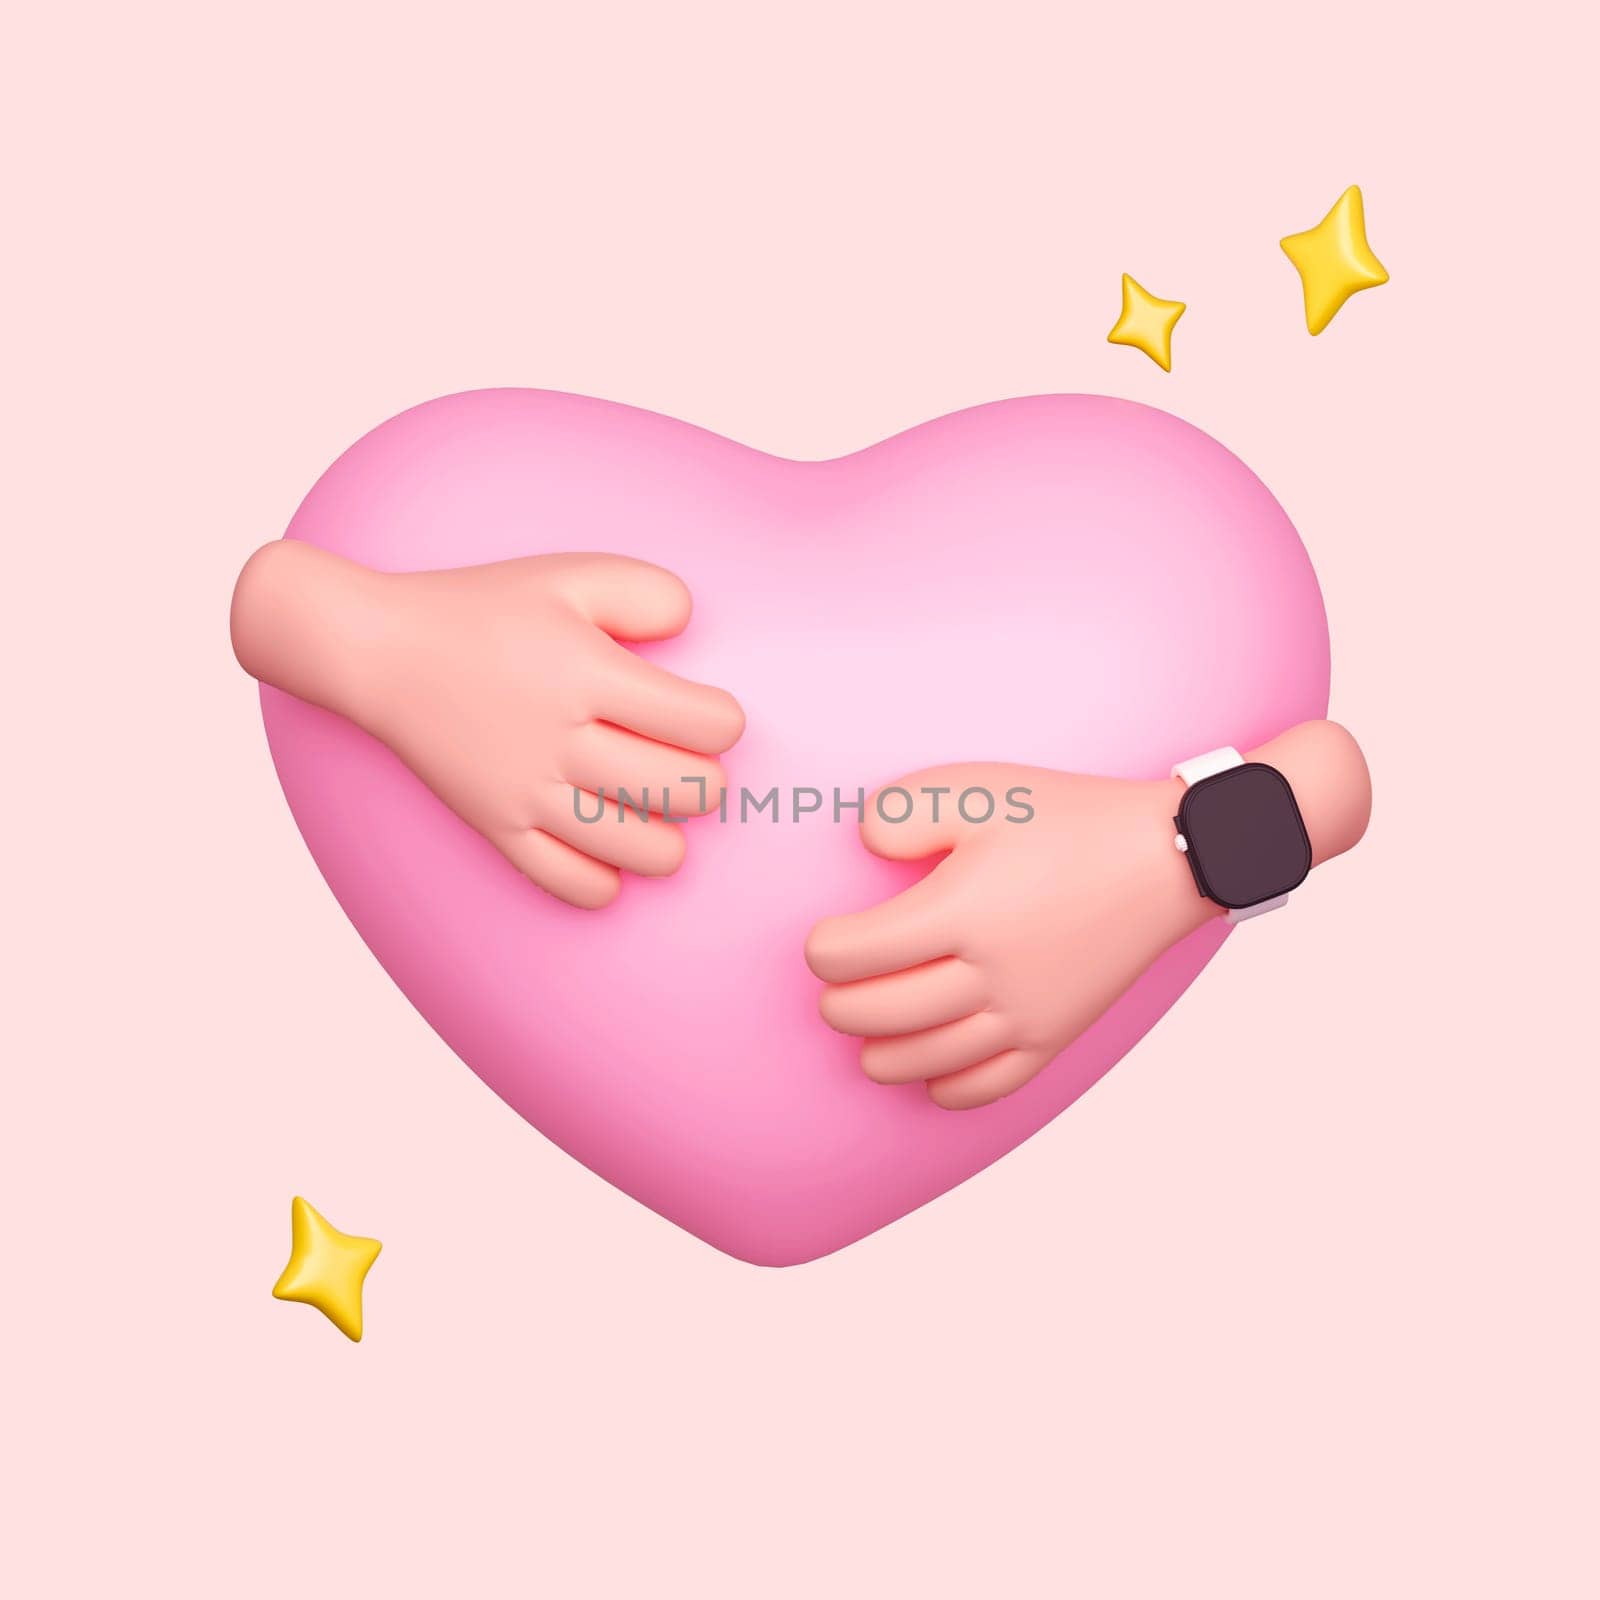 3D cartoon human hands hugging pink heart on pink background. Abstract concept of wedding, friendship and family. Two cartoon style funny open woman palms hugging heart. isolated on pink background. clipping path. 3D render illustration by meepiangraphic